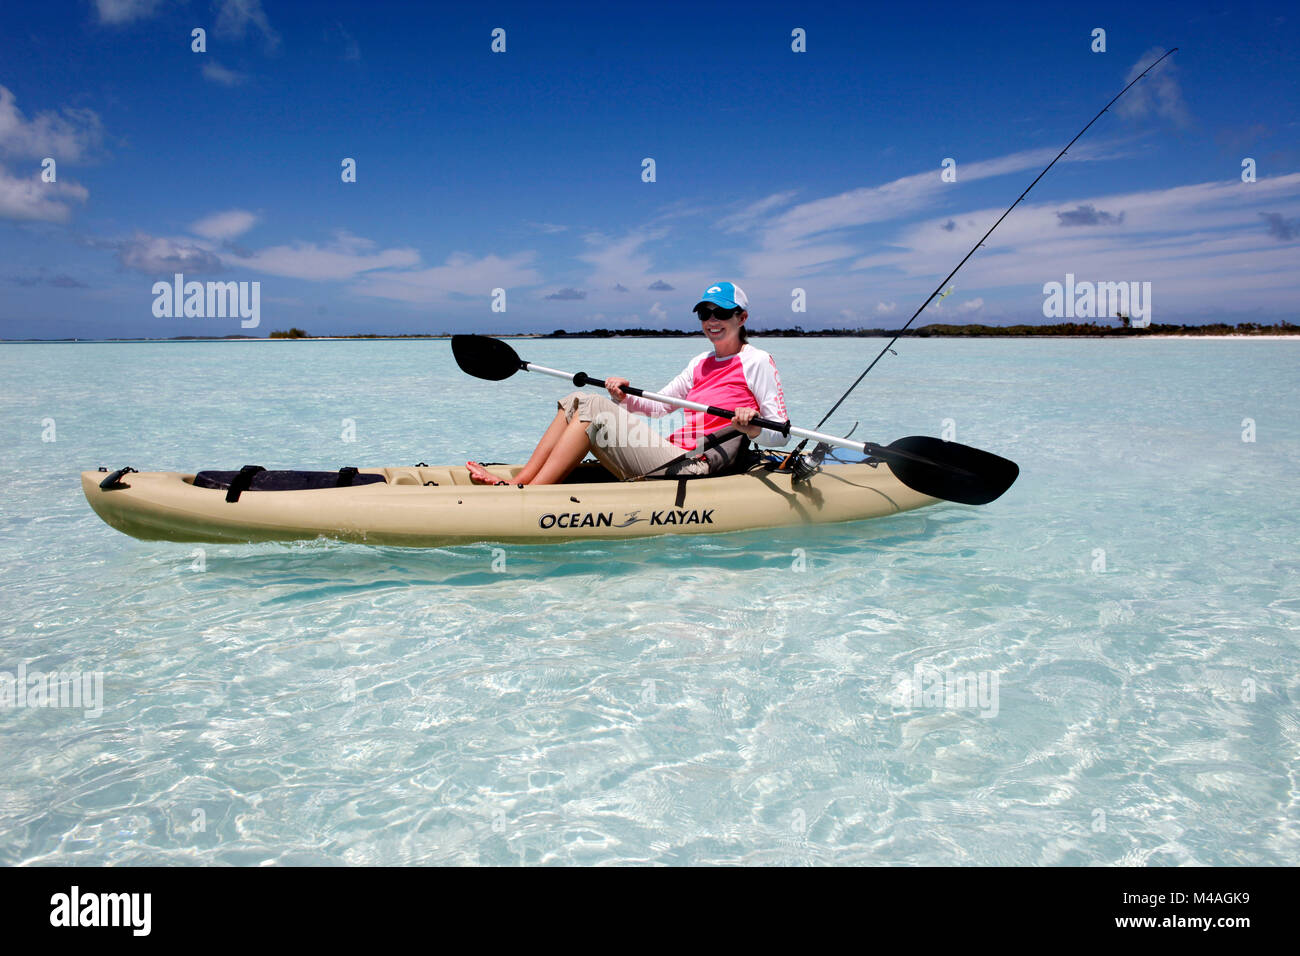 A woman paddles a kayak in the clear Bahamian waters near Man-O-War Cay just off the island of Great Exuma in the Bahamas. Stock Photo